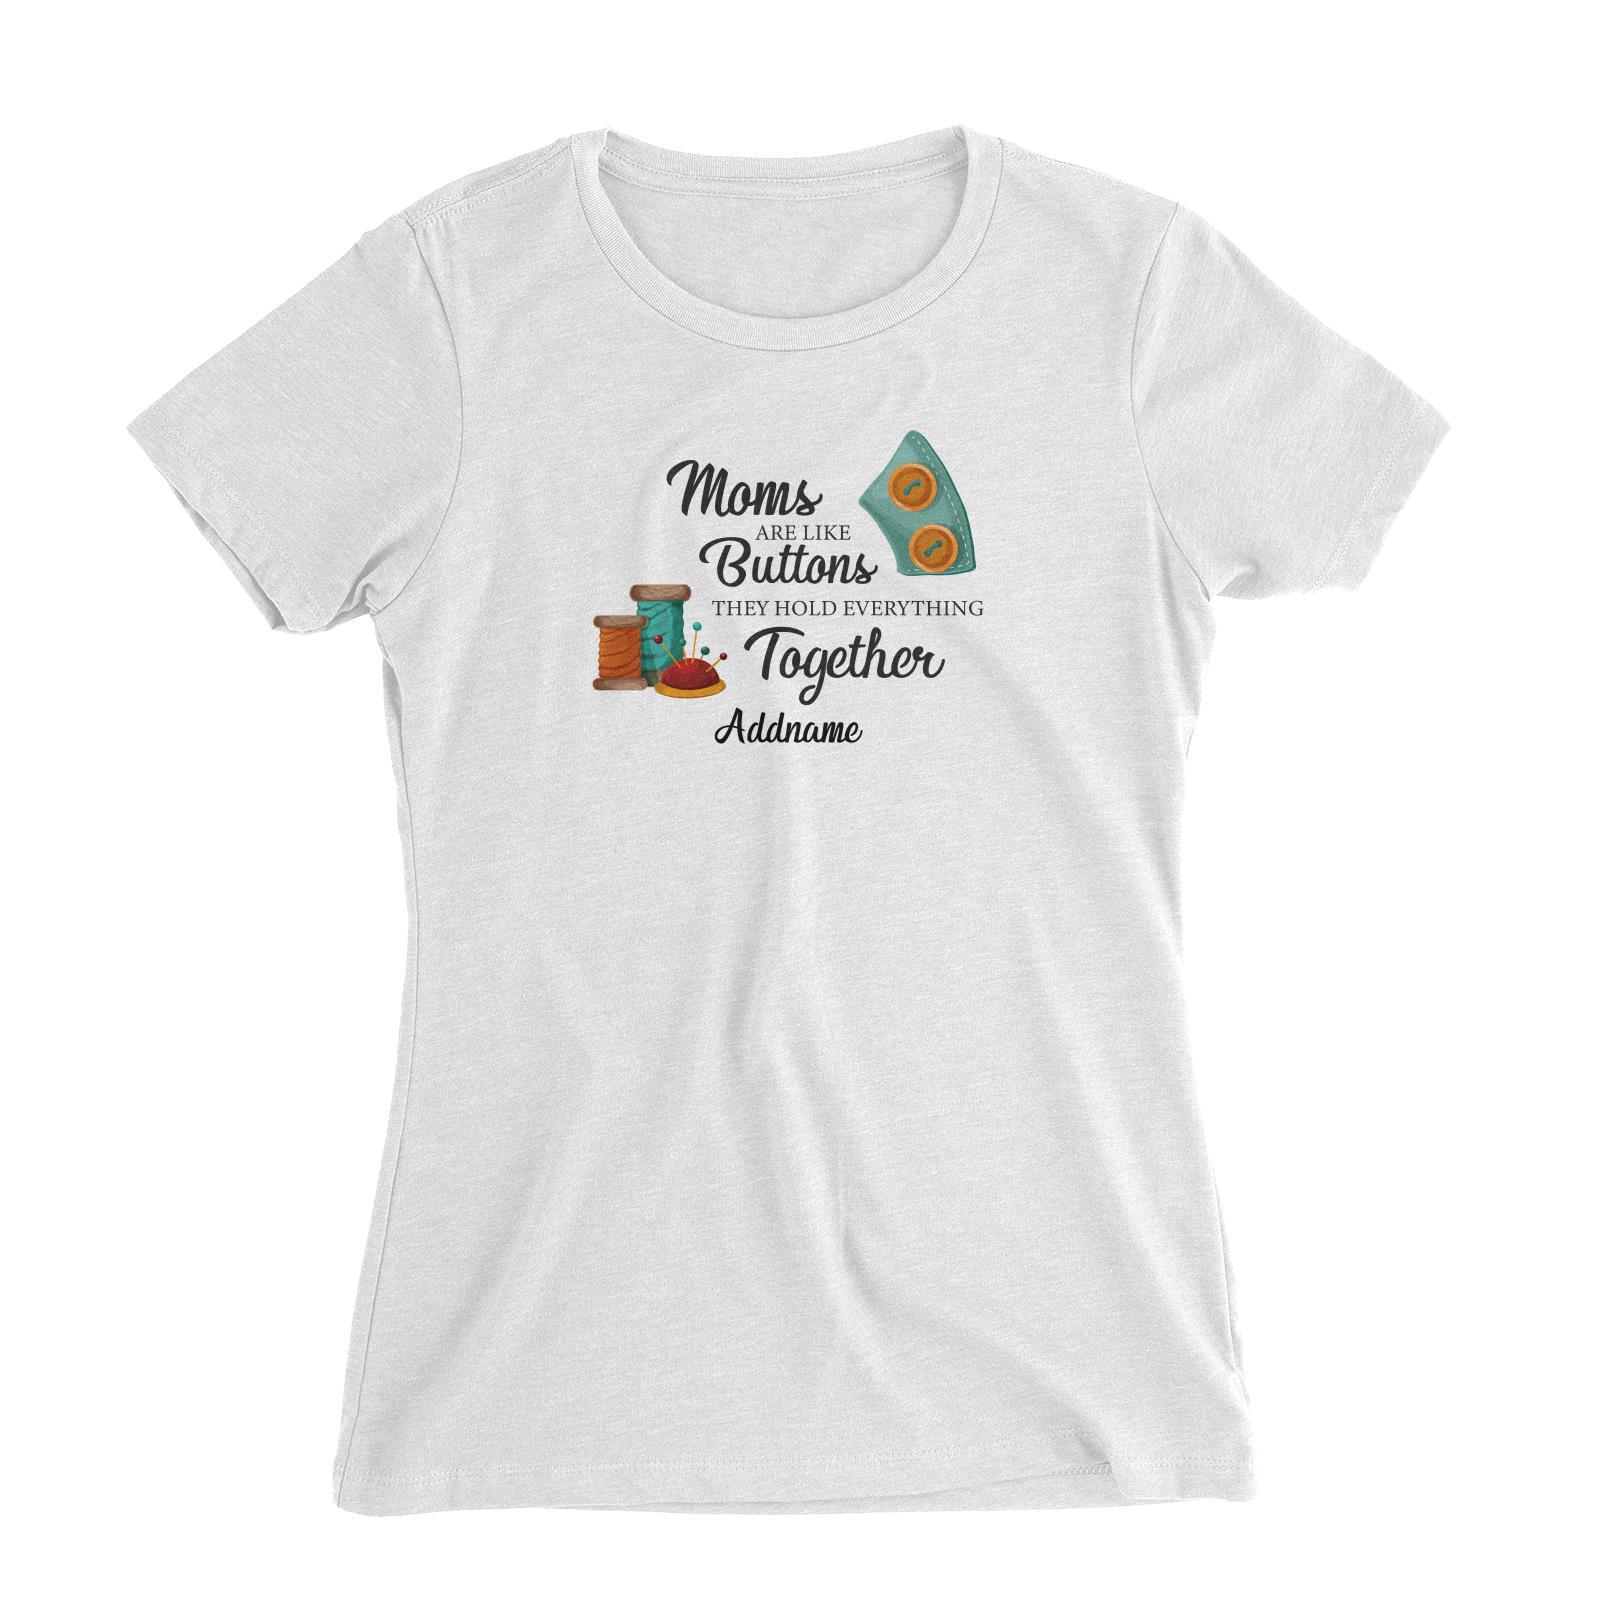 Sweet Mom Quotes 2 Moms Are Like Buttons They Hold Everything Together Addname Women's Slim Fit T-Shirt